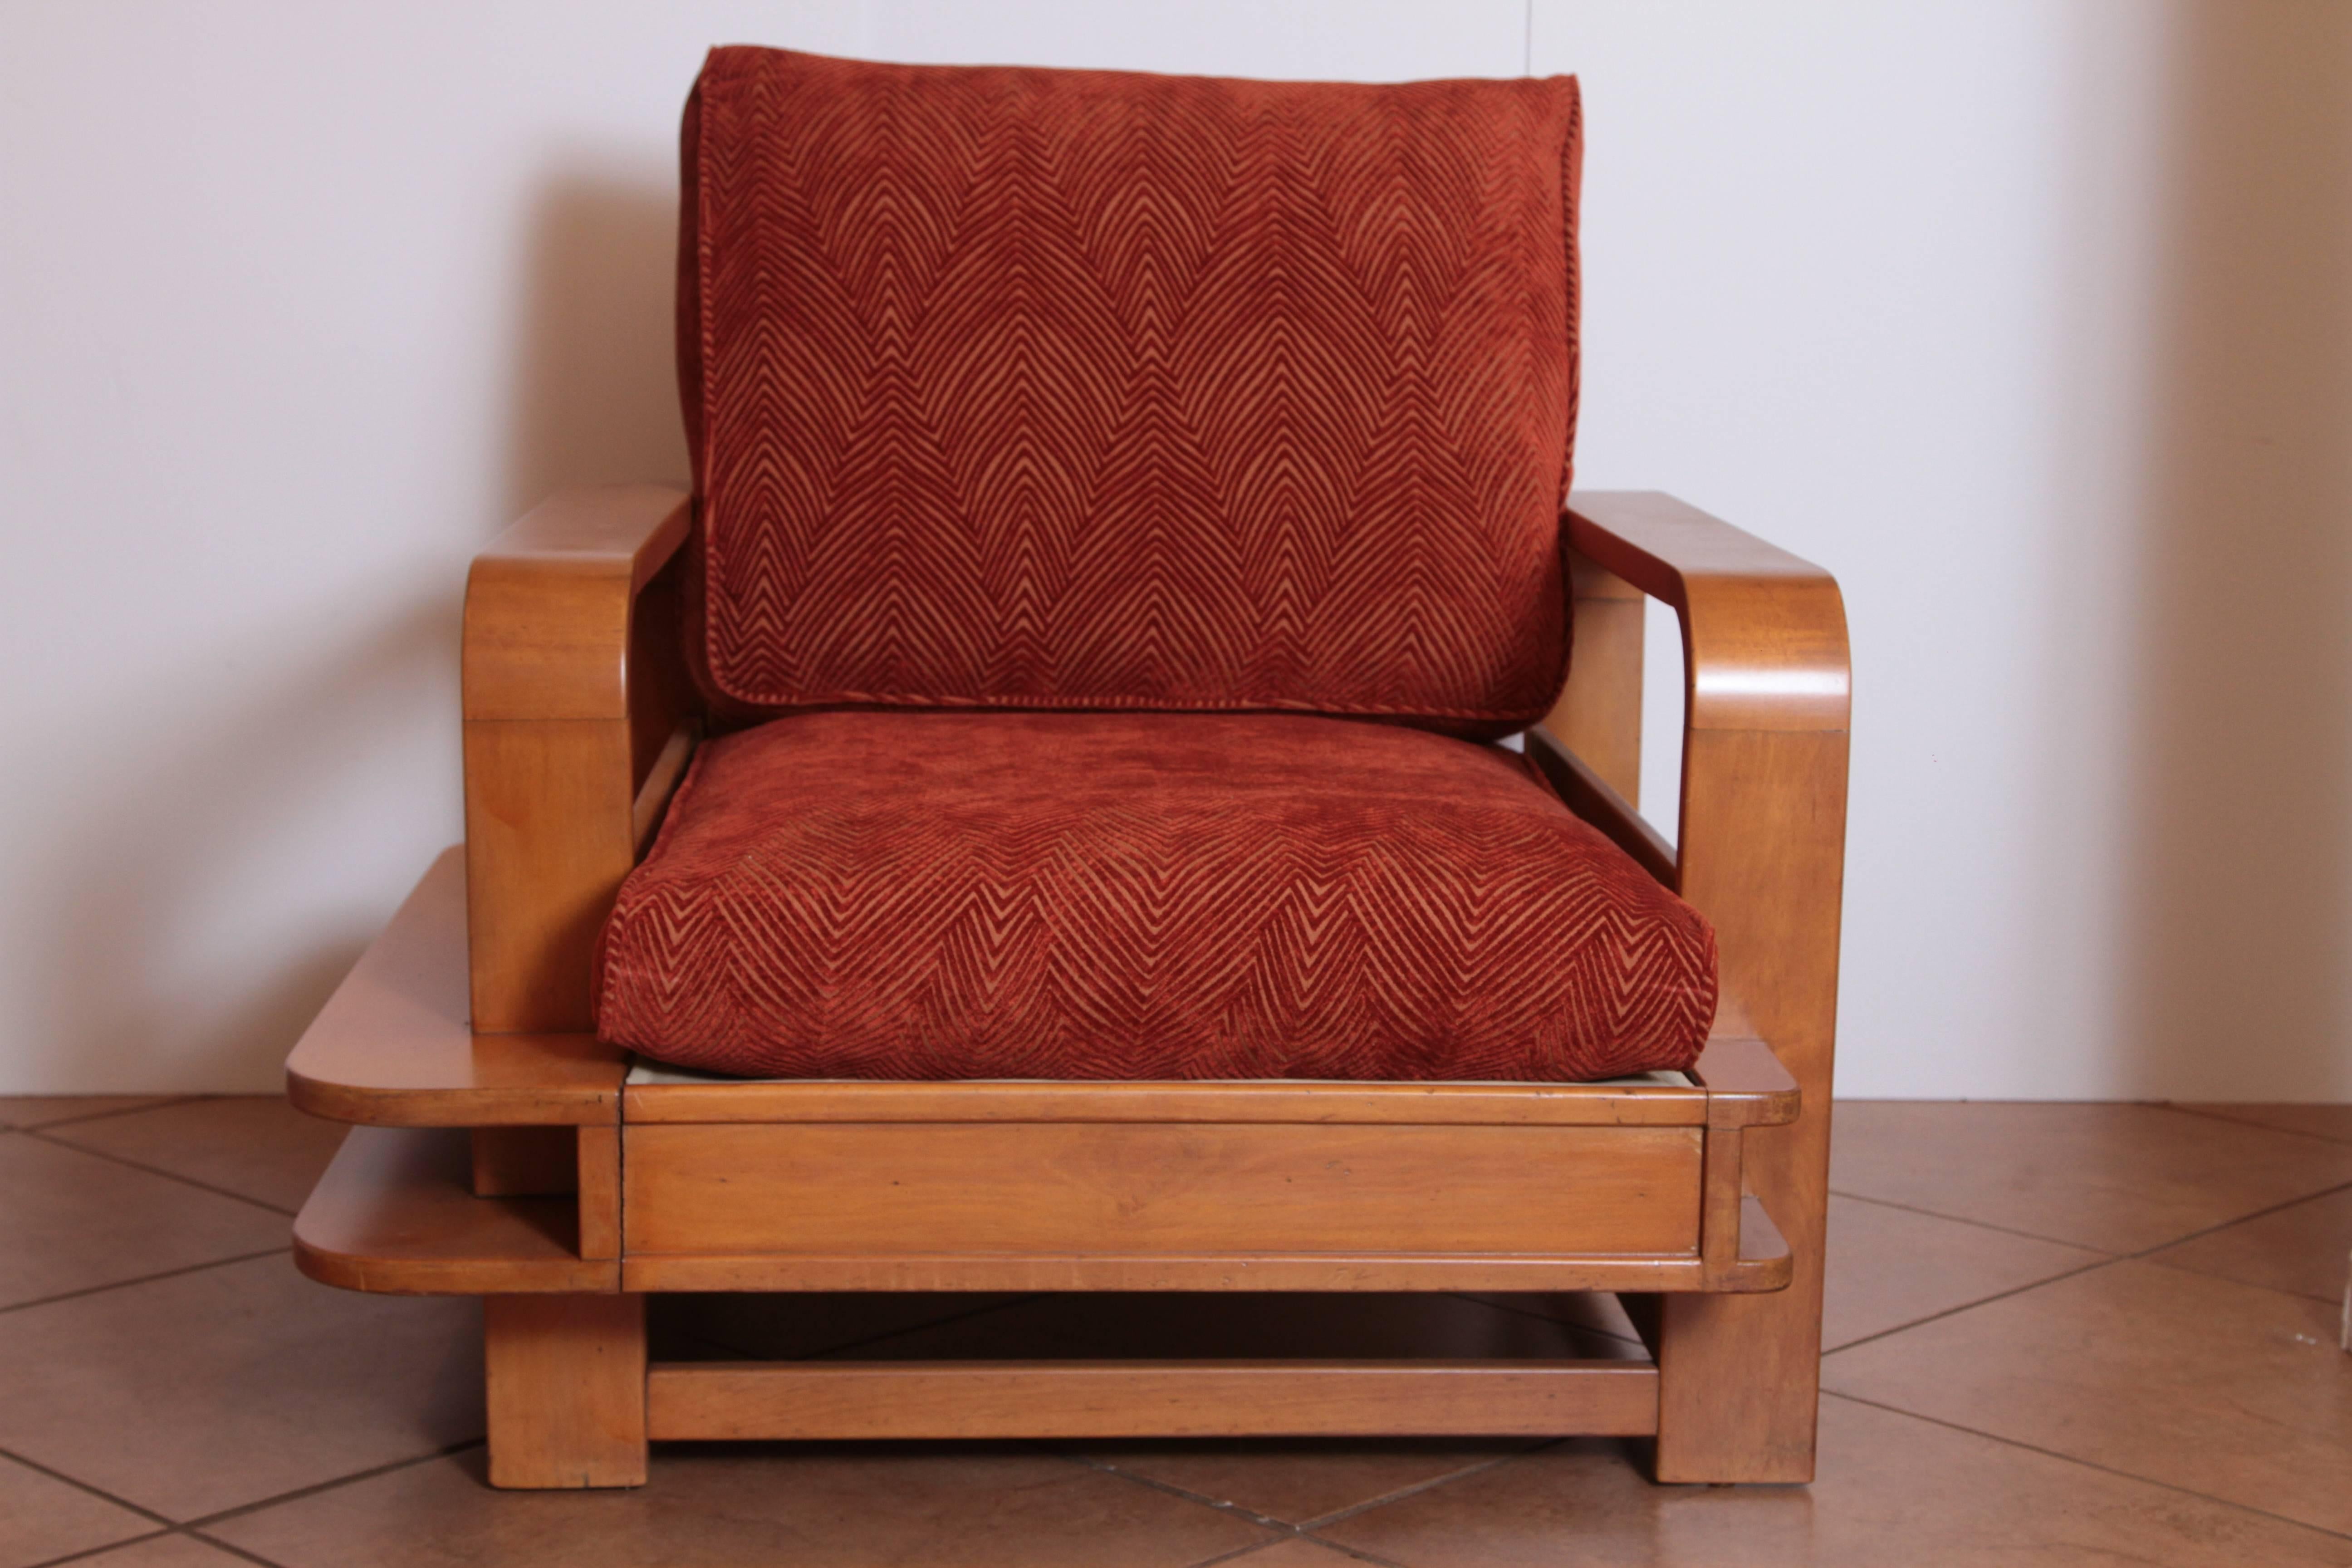 .Art Deco Machine Age Russel Wright Conant Ball Asymmetric Lounge Chair   Club Chair  Asymmetrical  PRICE REDUCED

Rare early iconic Wright Design. One of his most striking furniture designs, circa 1935.
Classic steam-bent streamline maple elements,